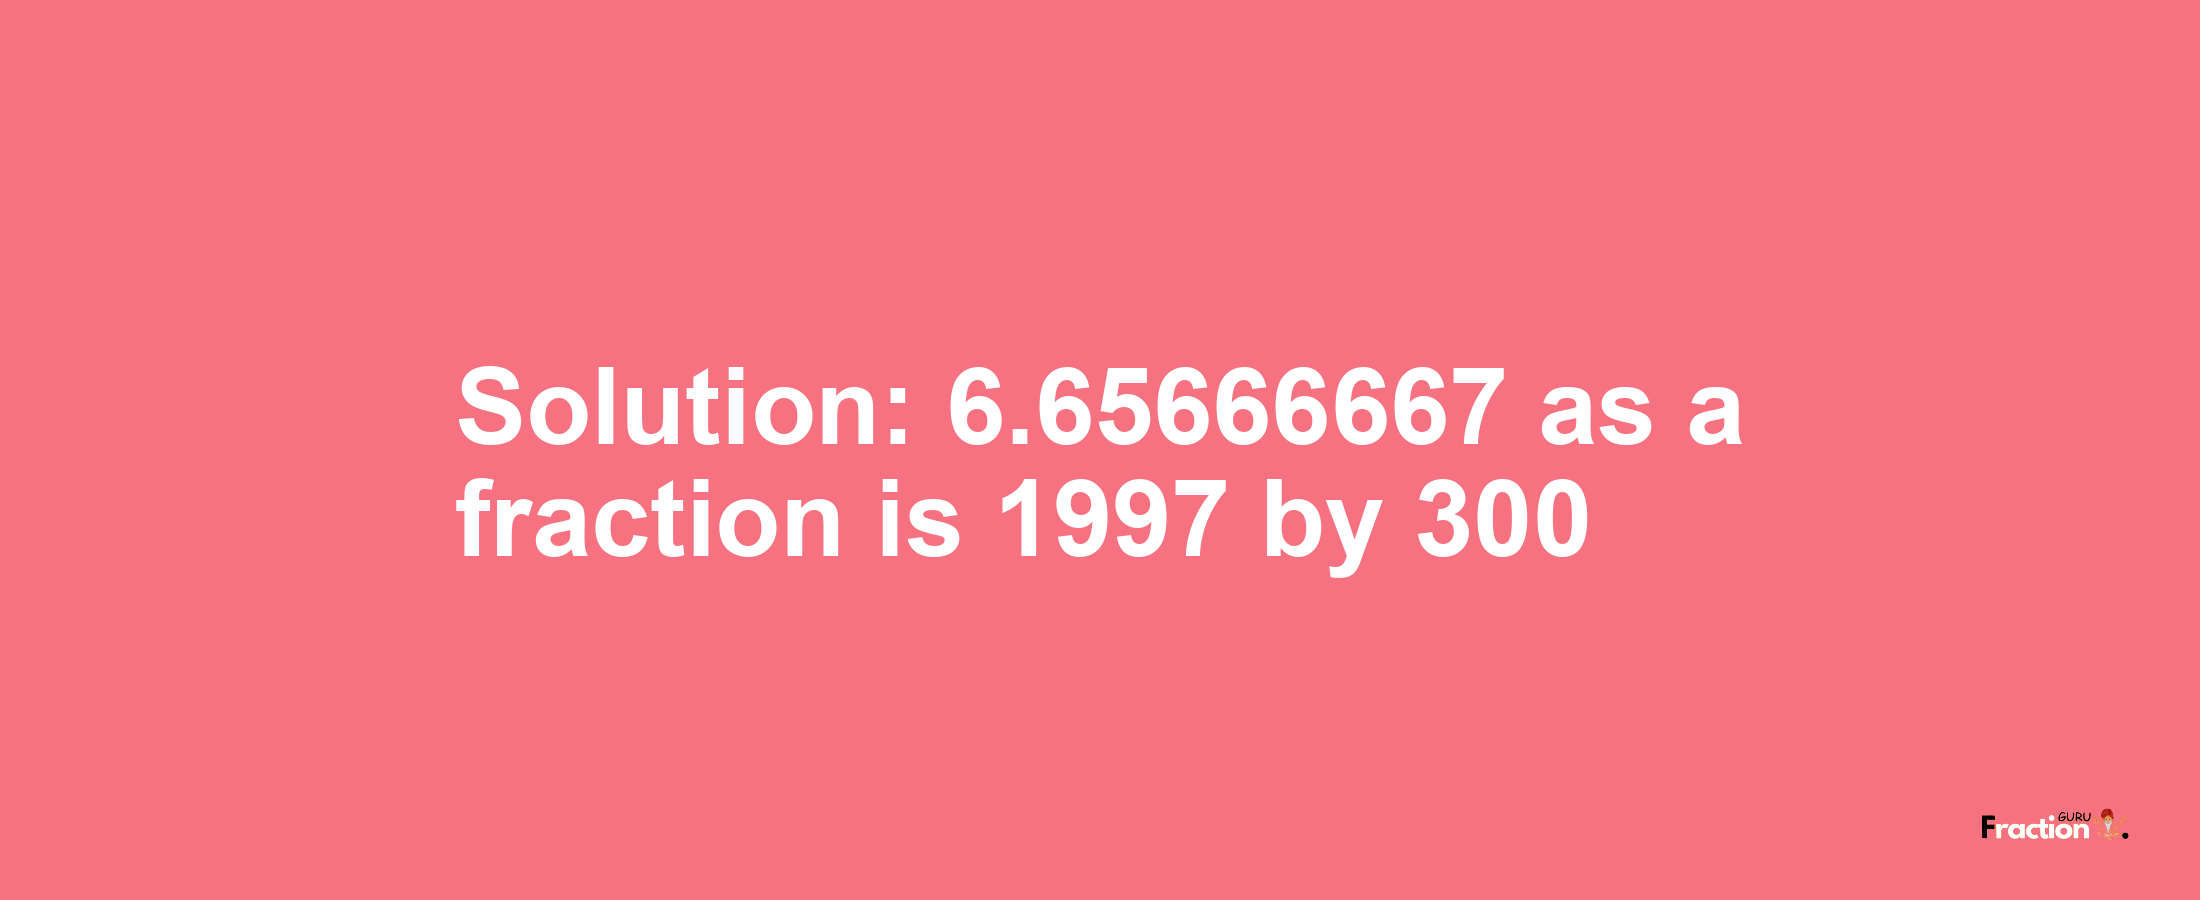 Solution:6.65666667 as a fraction is 1997/300